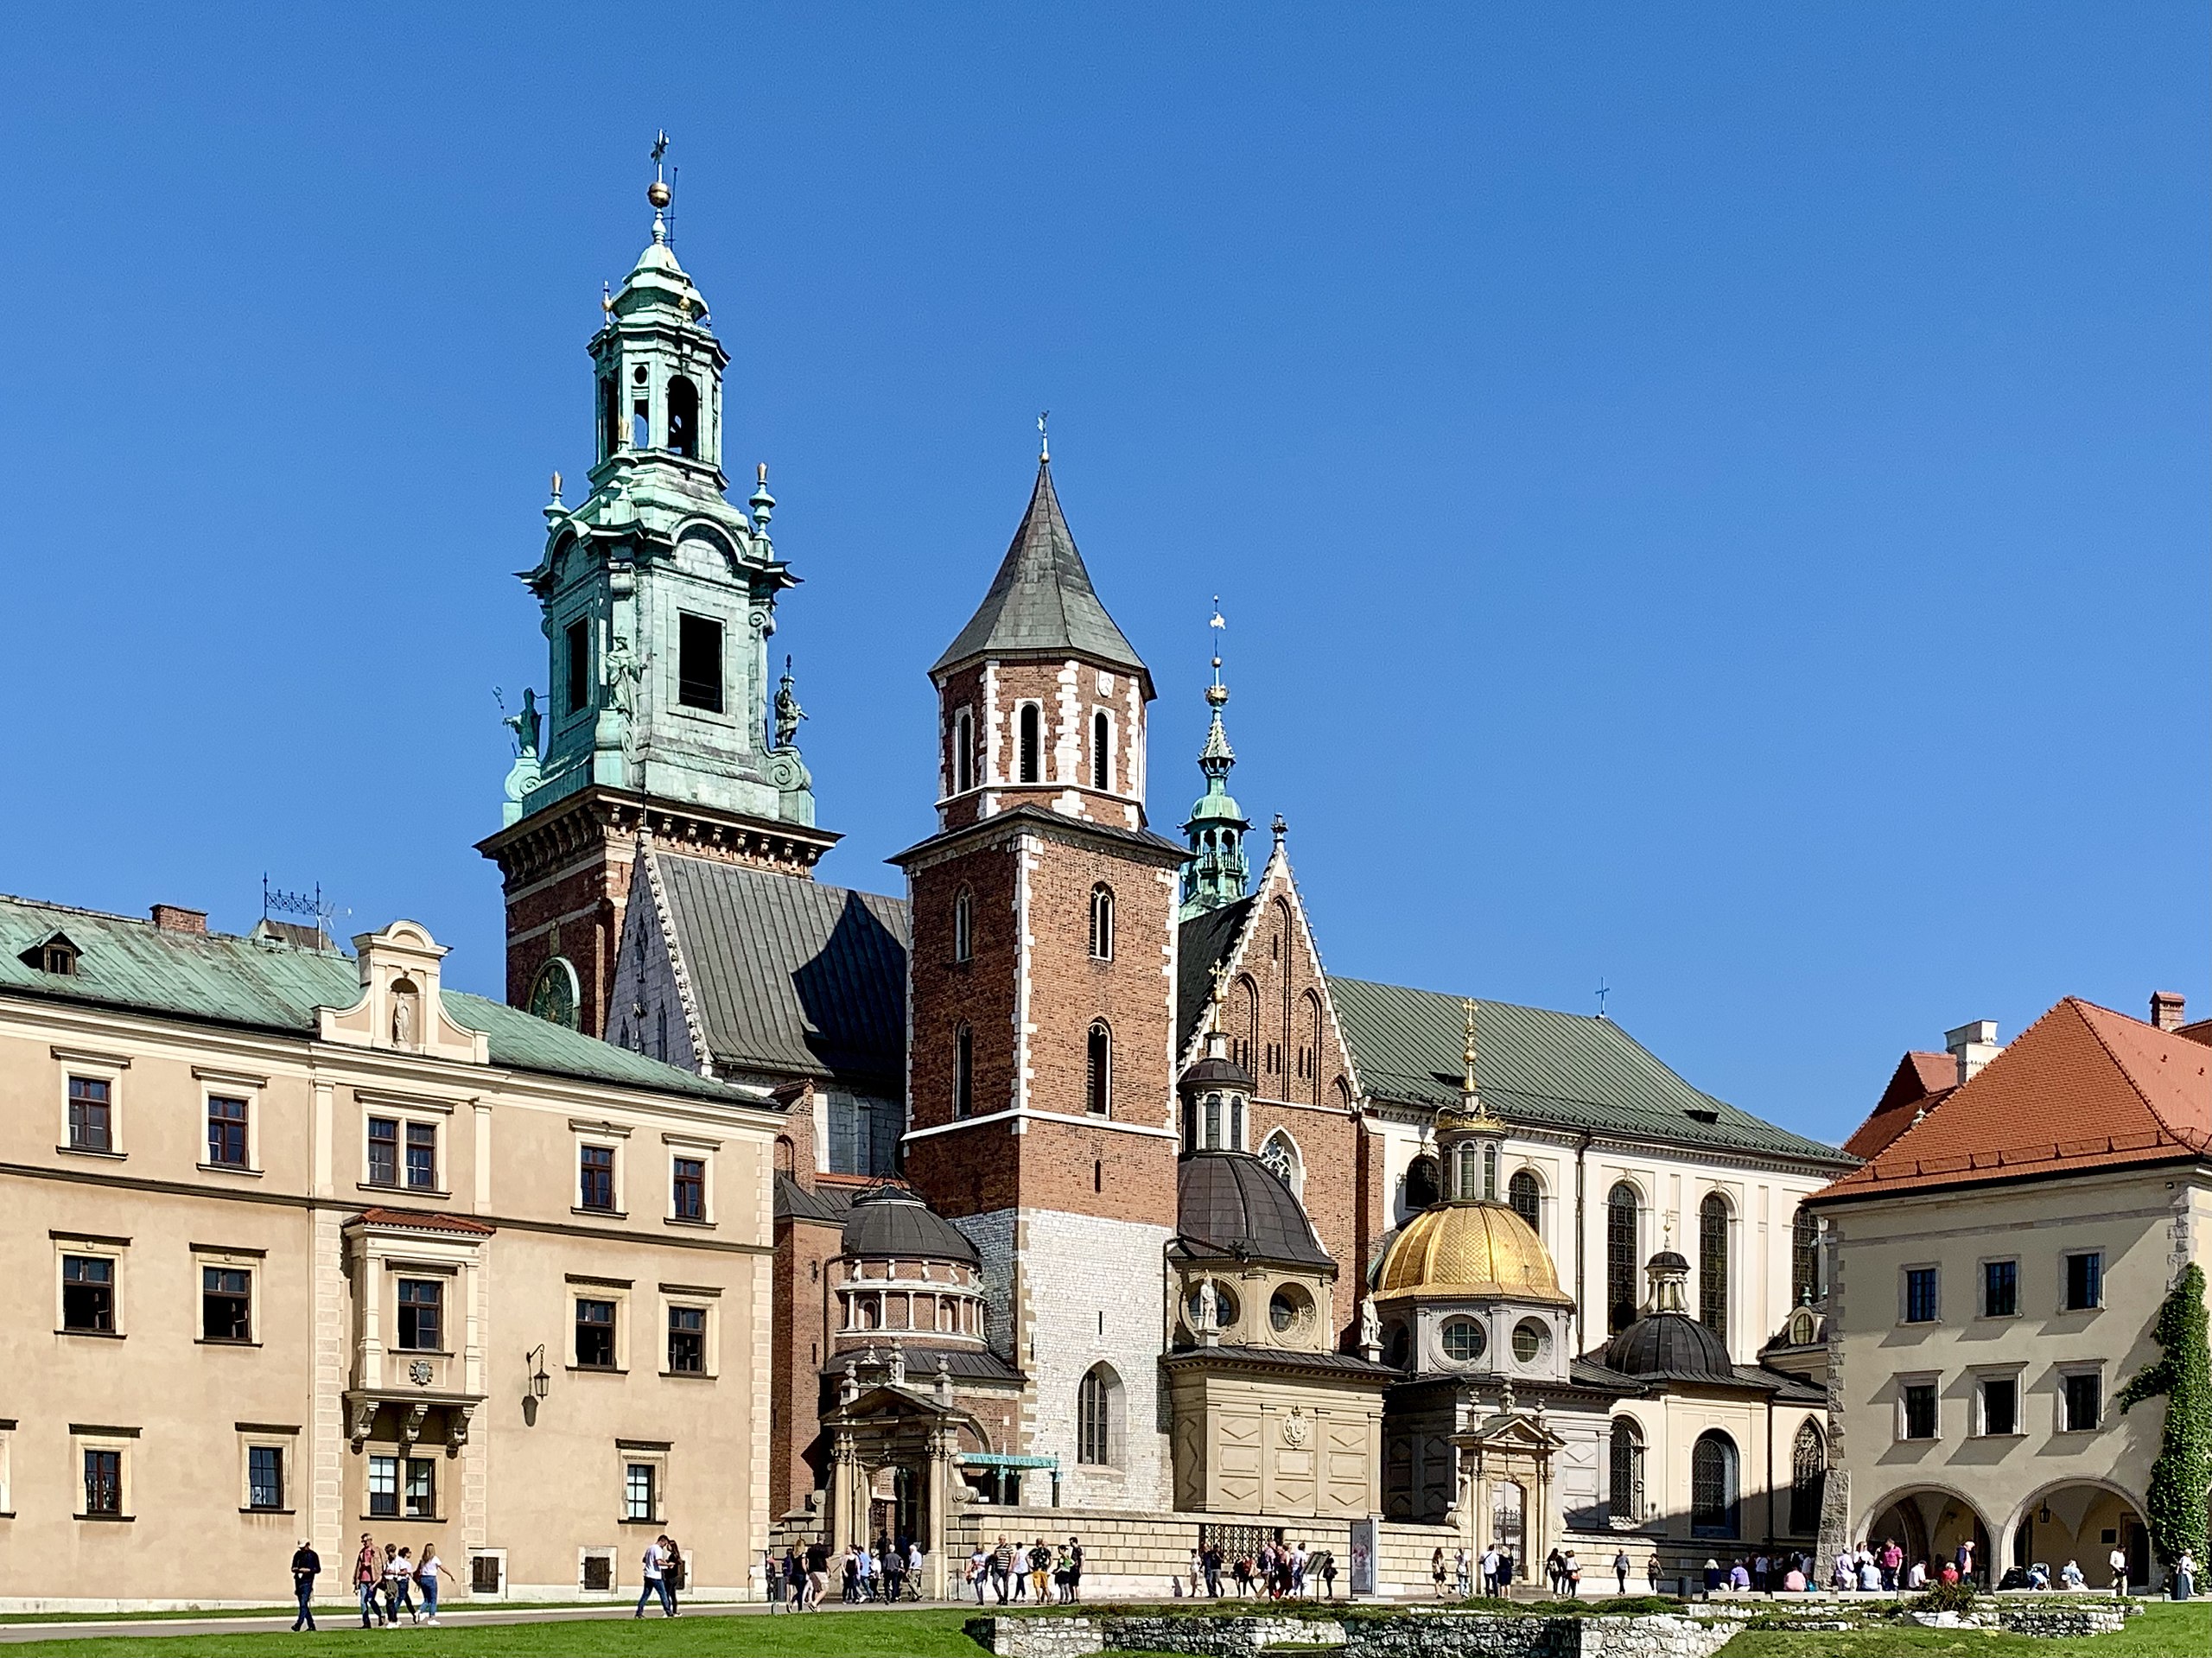 Cracow: The City That Survived